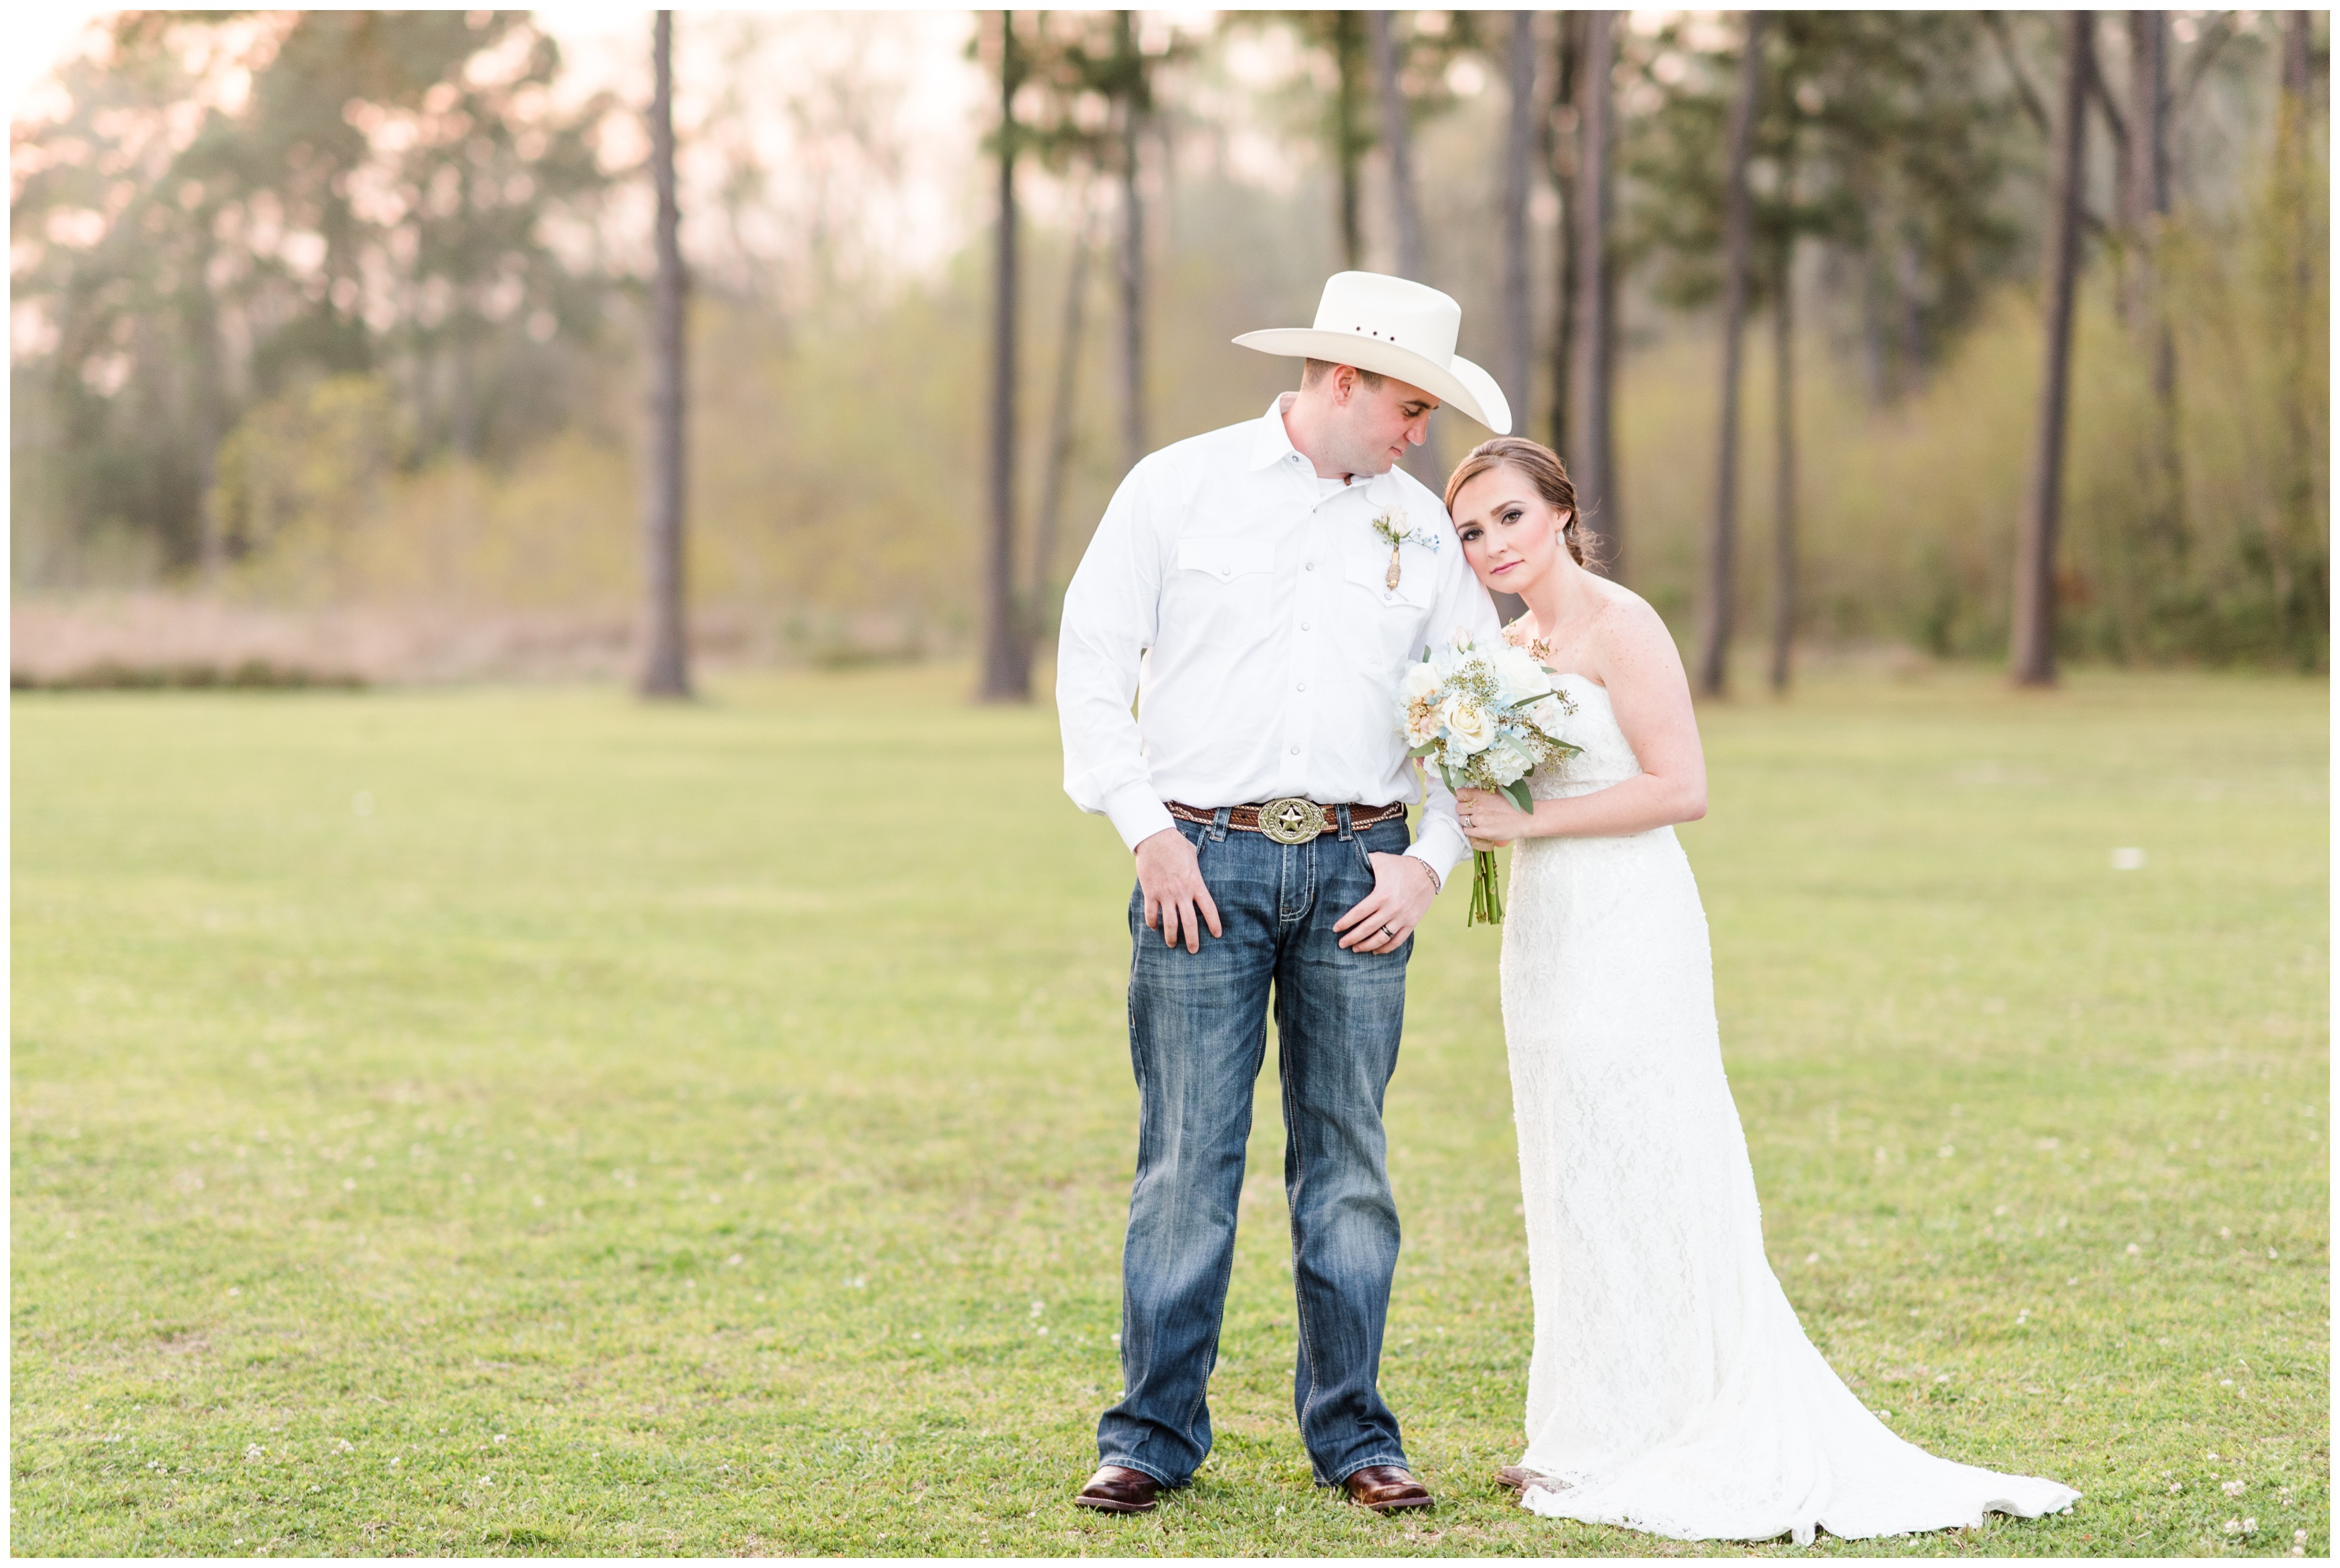 The Barn at Four Pines Wedding in Crosby TX - Kevin and Sammi_0358